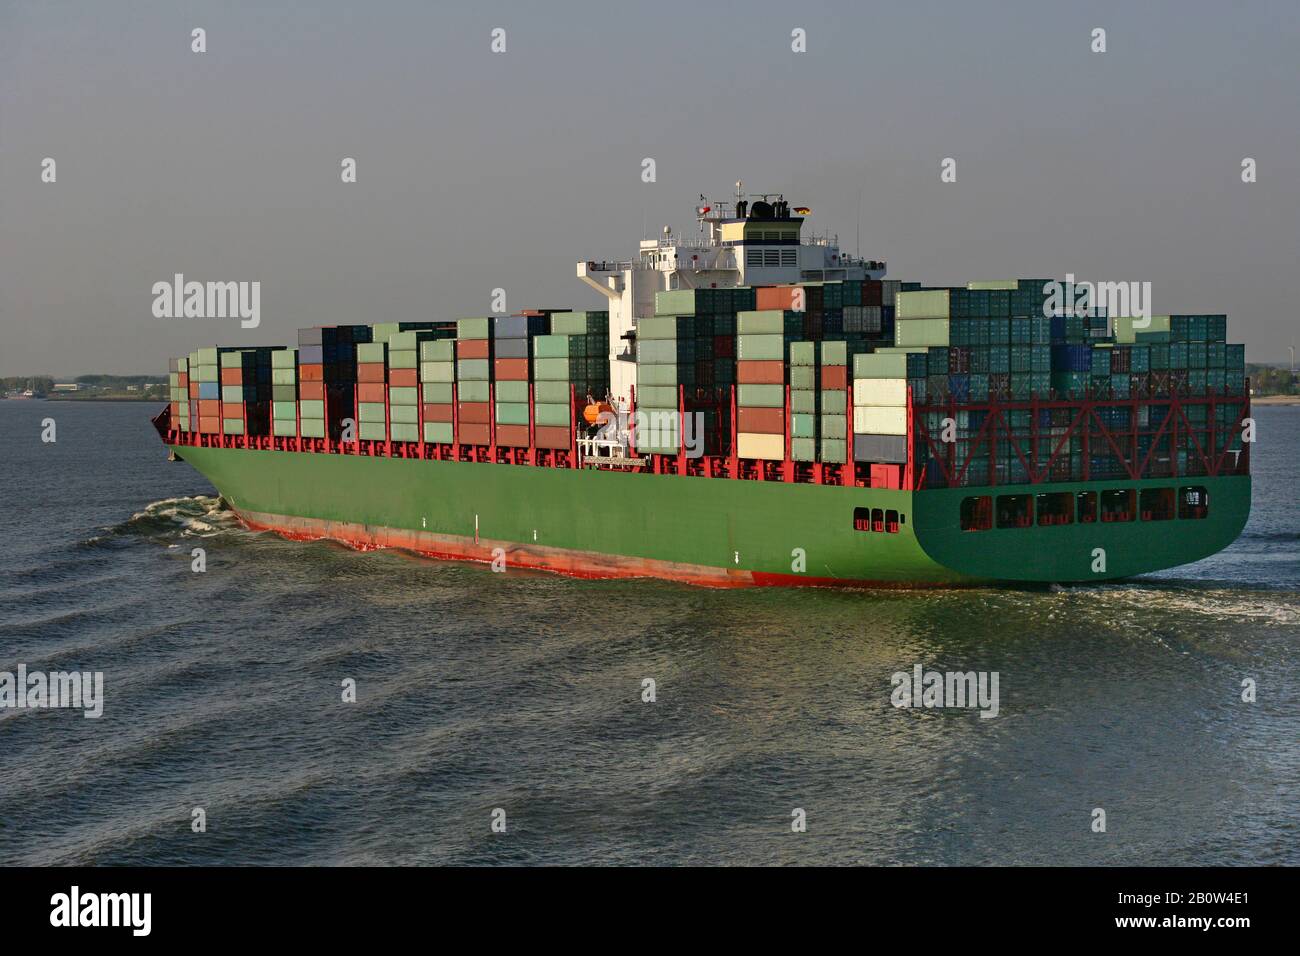 Freight container ship in the Elbe river near Hamburg, Germany. Stock Photo